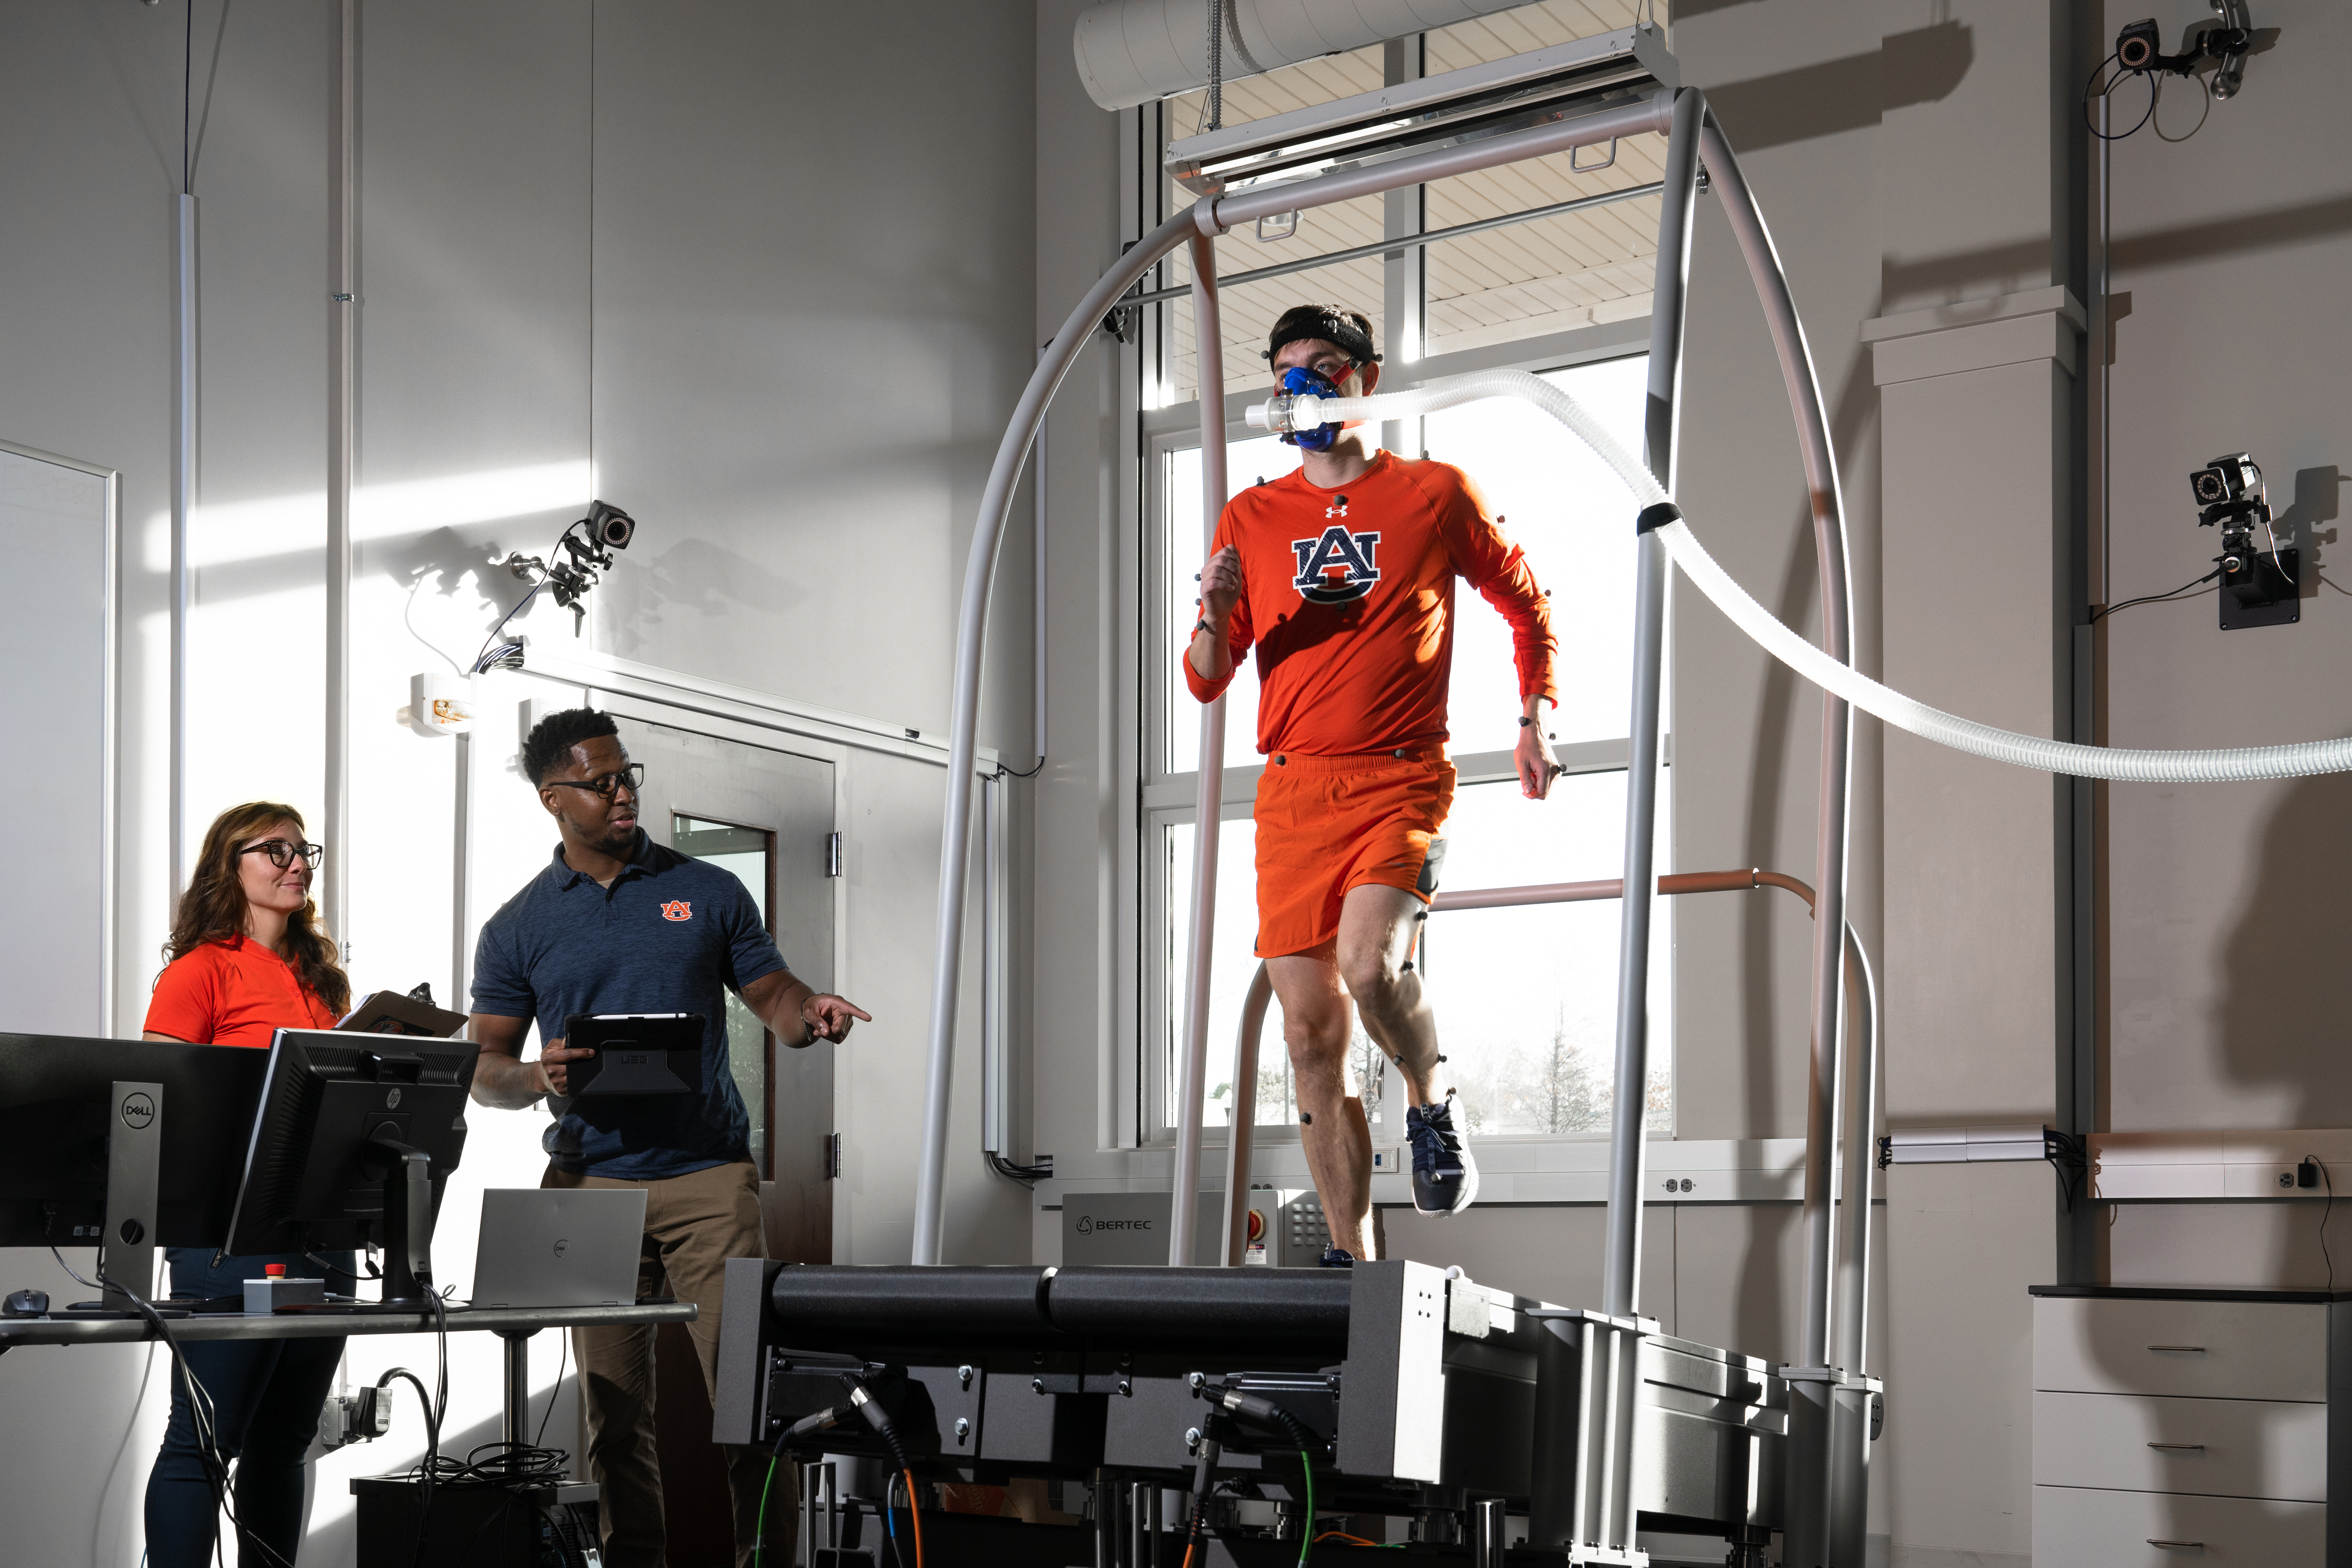 A research participant walks on a split treadmill while two researchers watch and collect data.